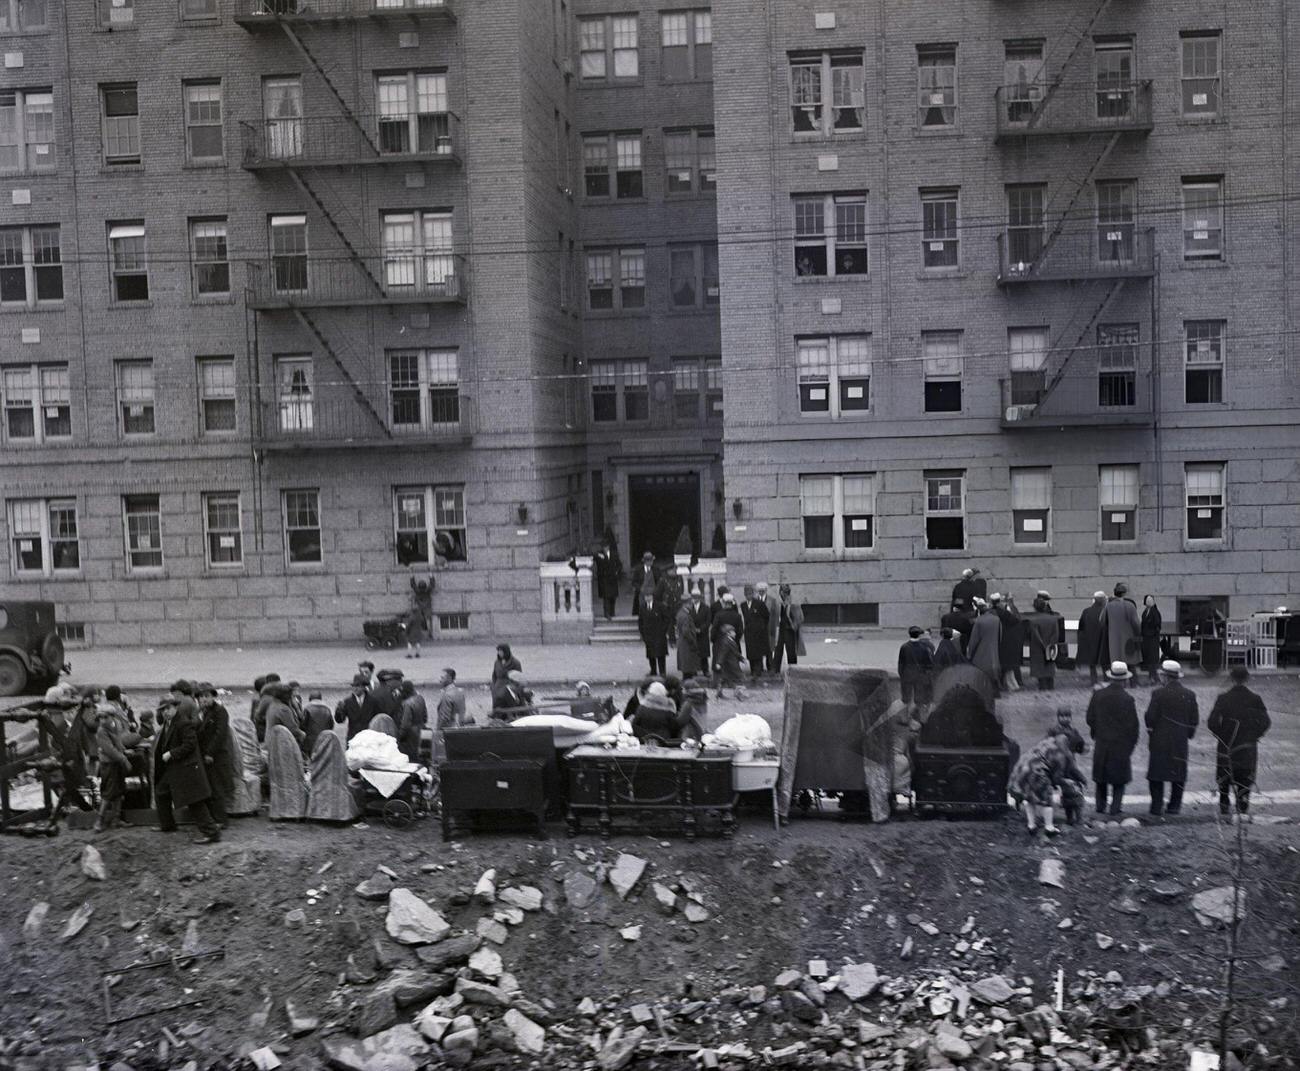 Furniture Of Evicted Tenants On The Street, Bronx, 1932.